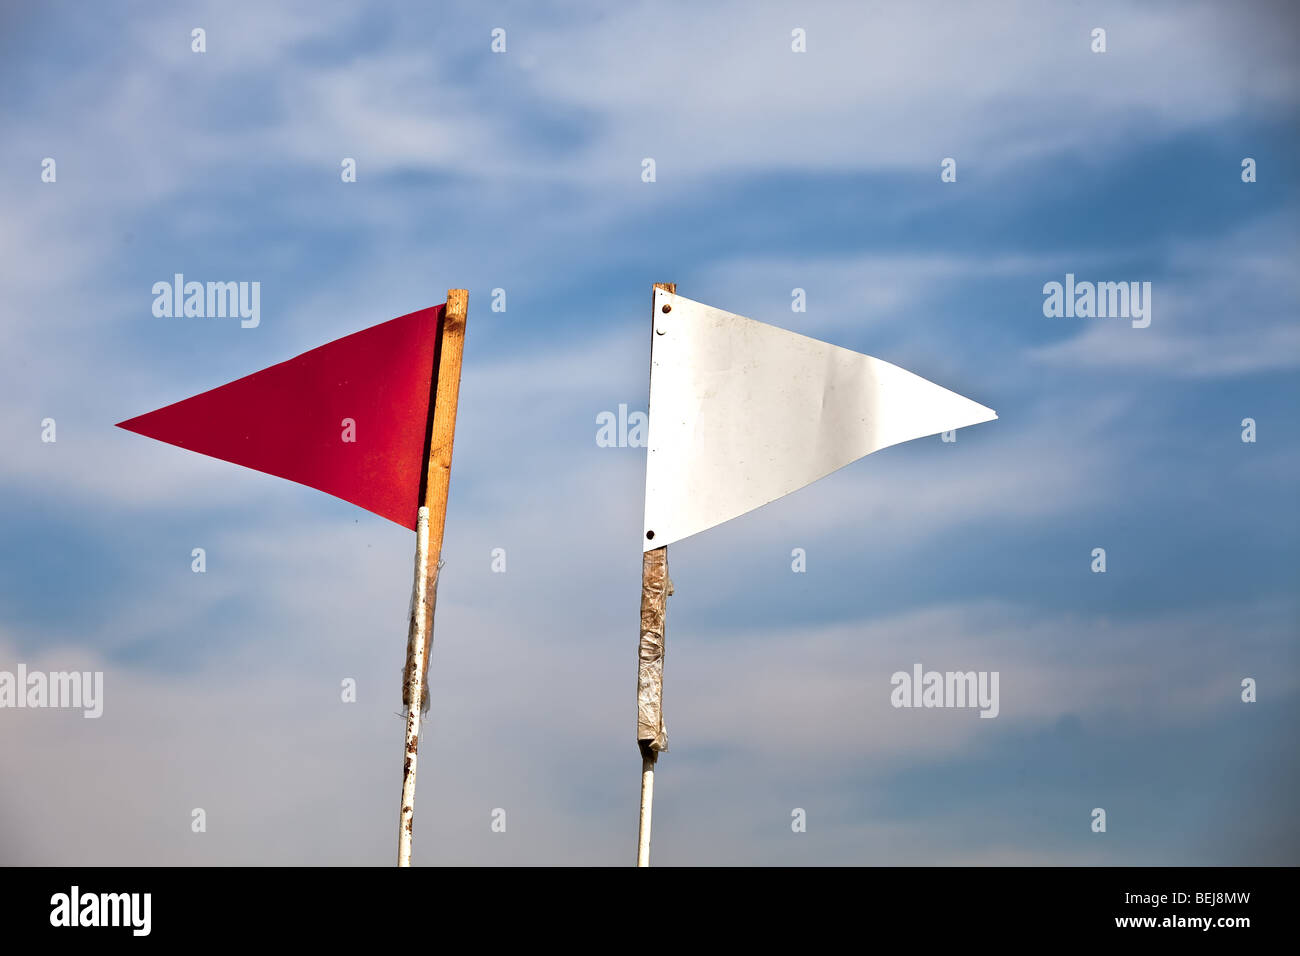 Red and white flag against blue sky Stock Photo